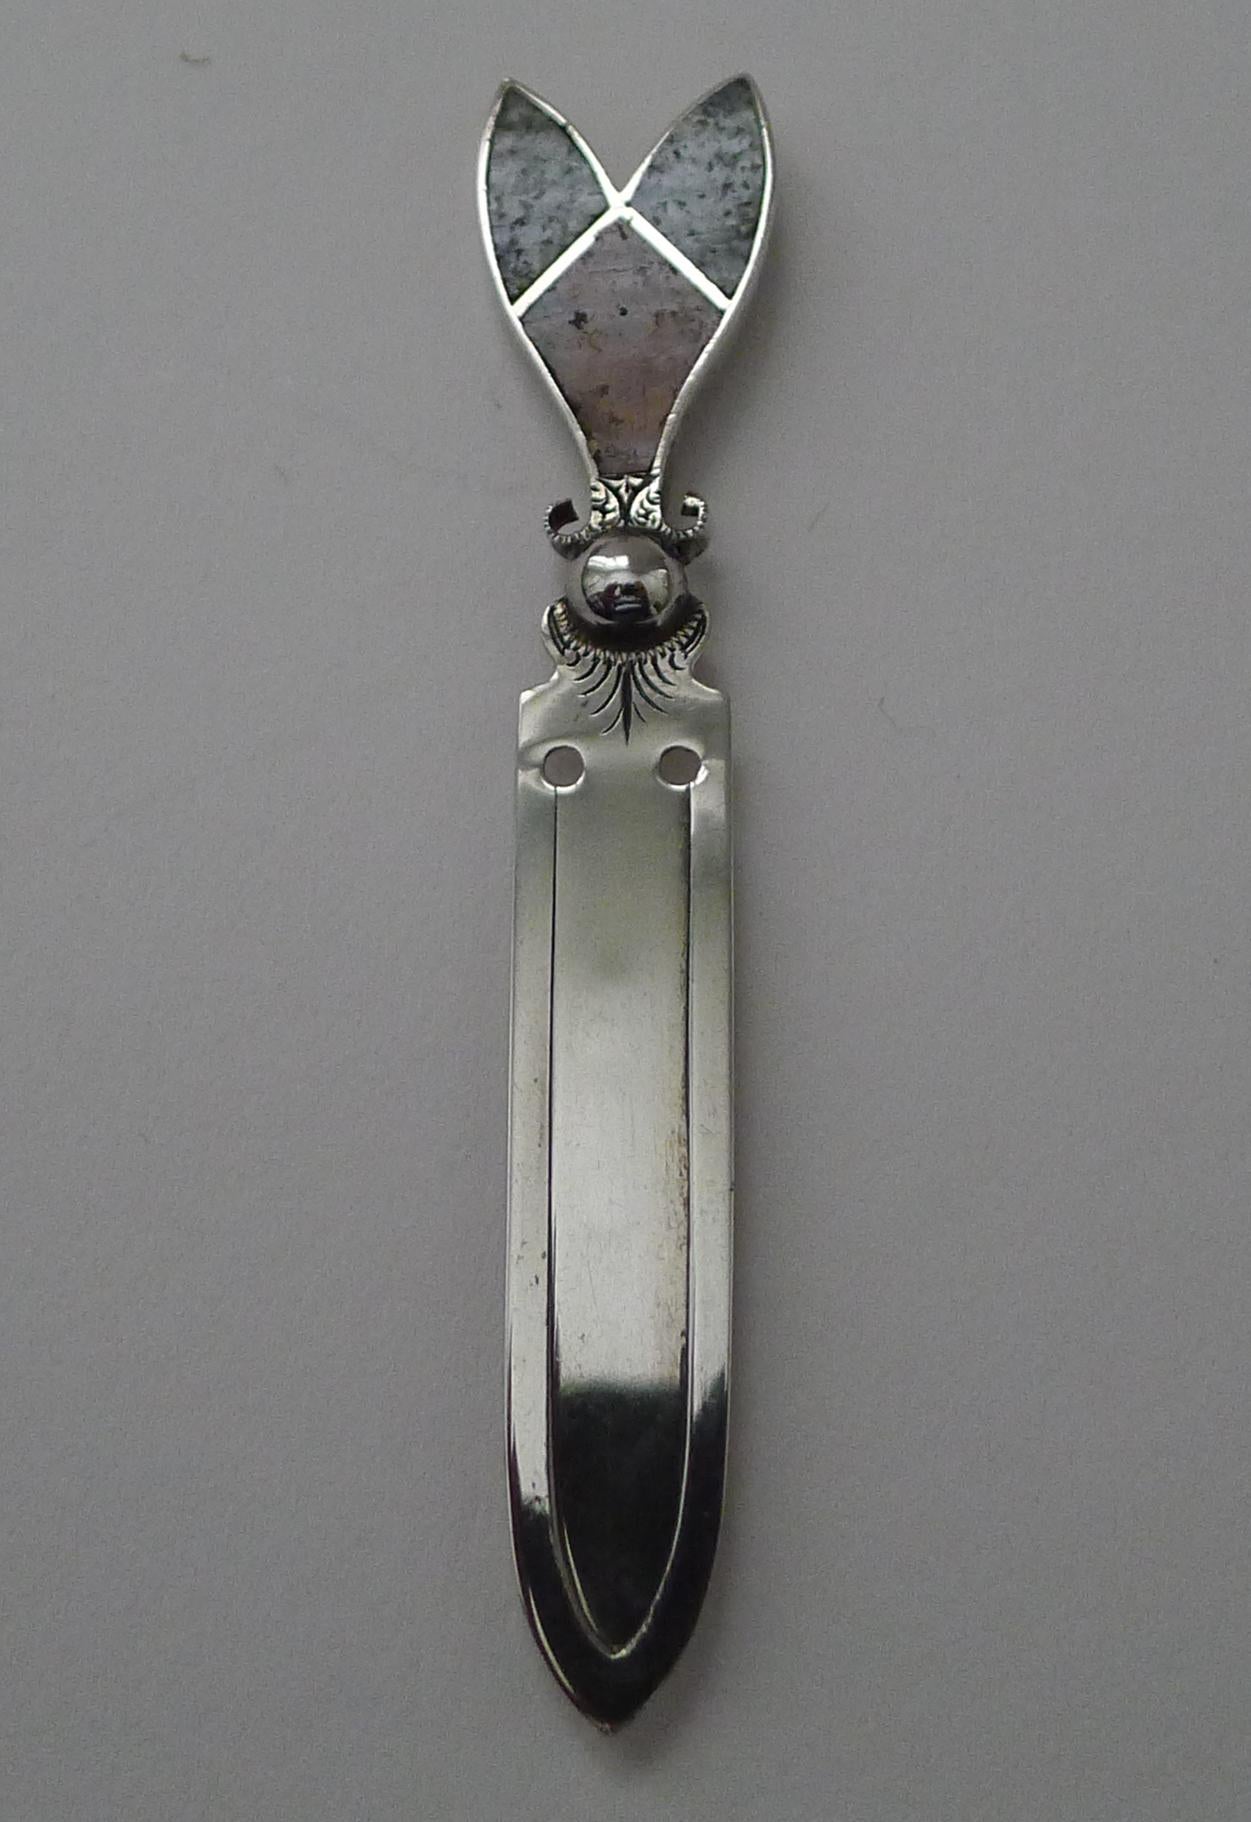 A handsome little bookmark made from sterling silver (marked Sterling), the terminal inset with red and green hardstones.

The silver is signed by the Birmingham silversmith, Joseph Cook & Son Ltd.  Dating to c.1910, it remains in excellent